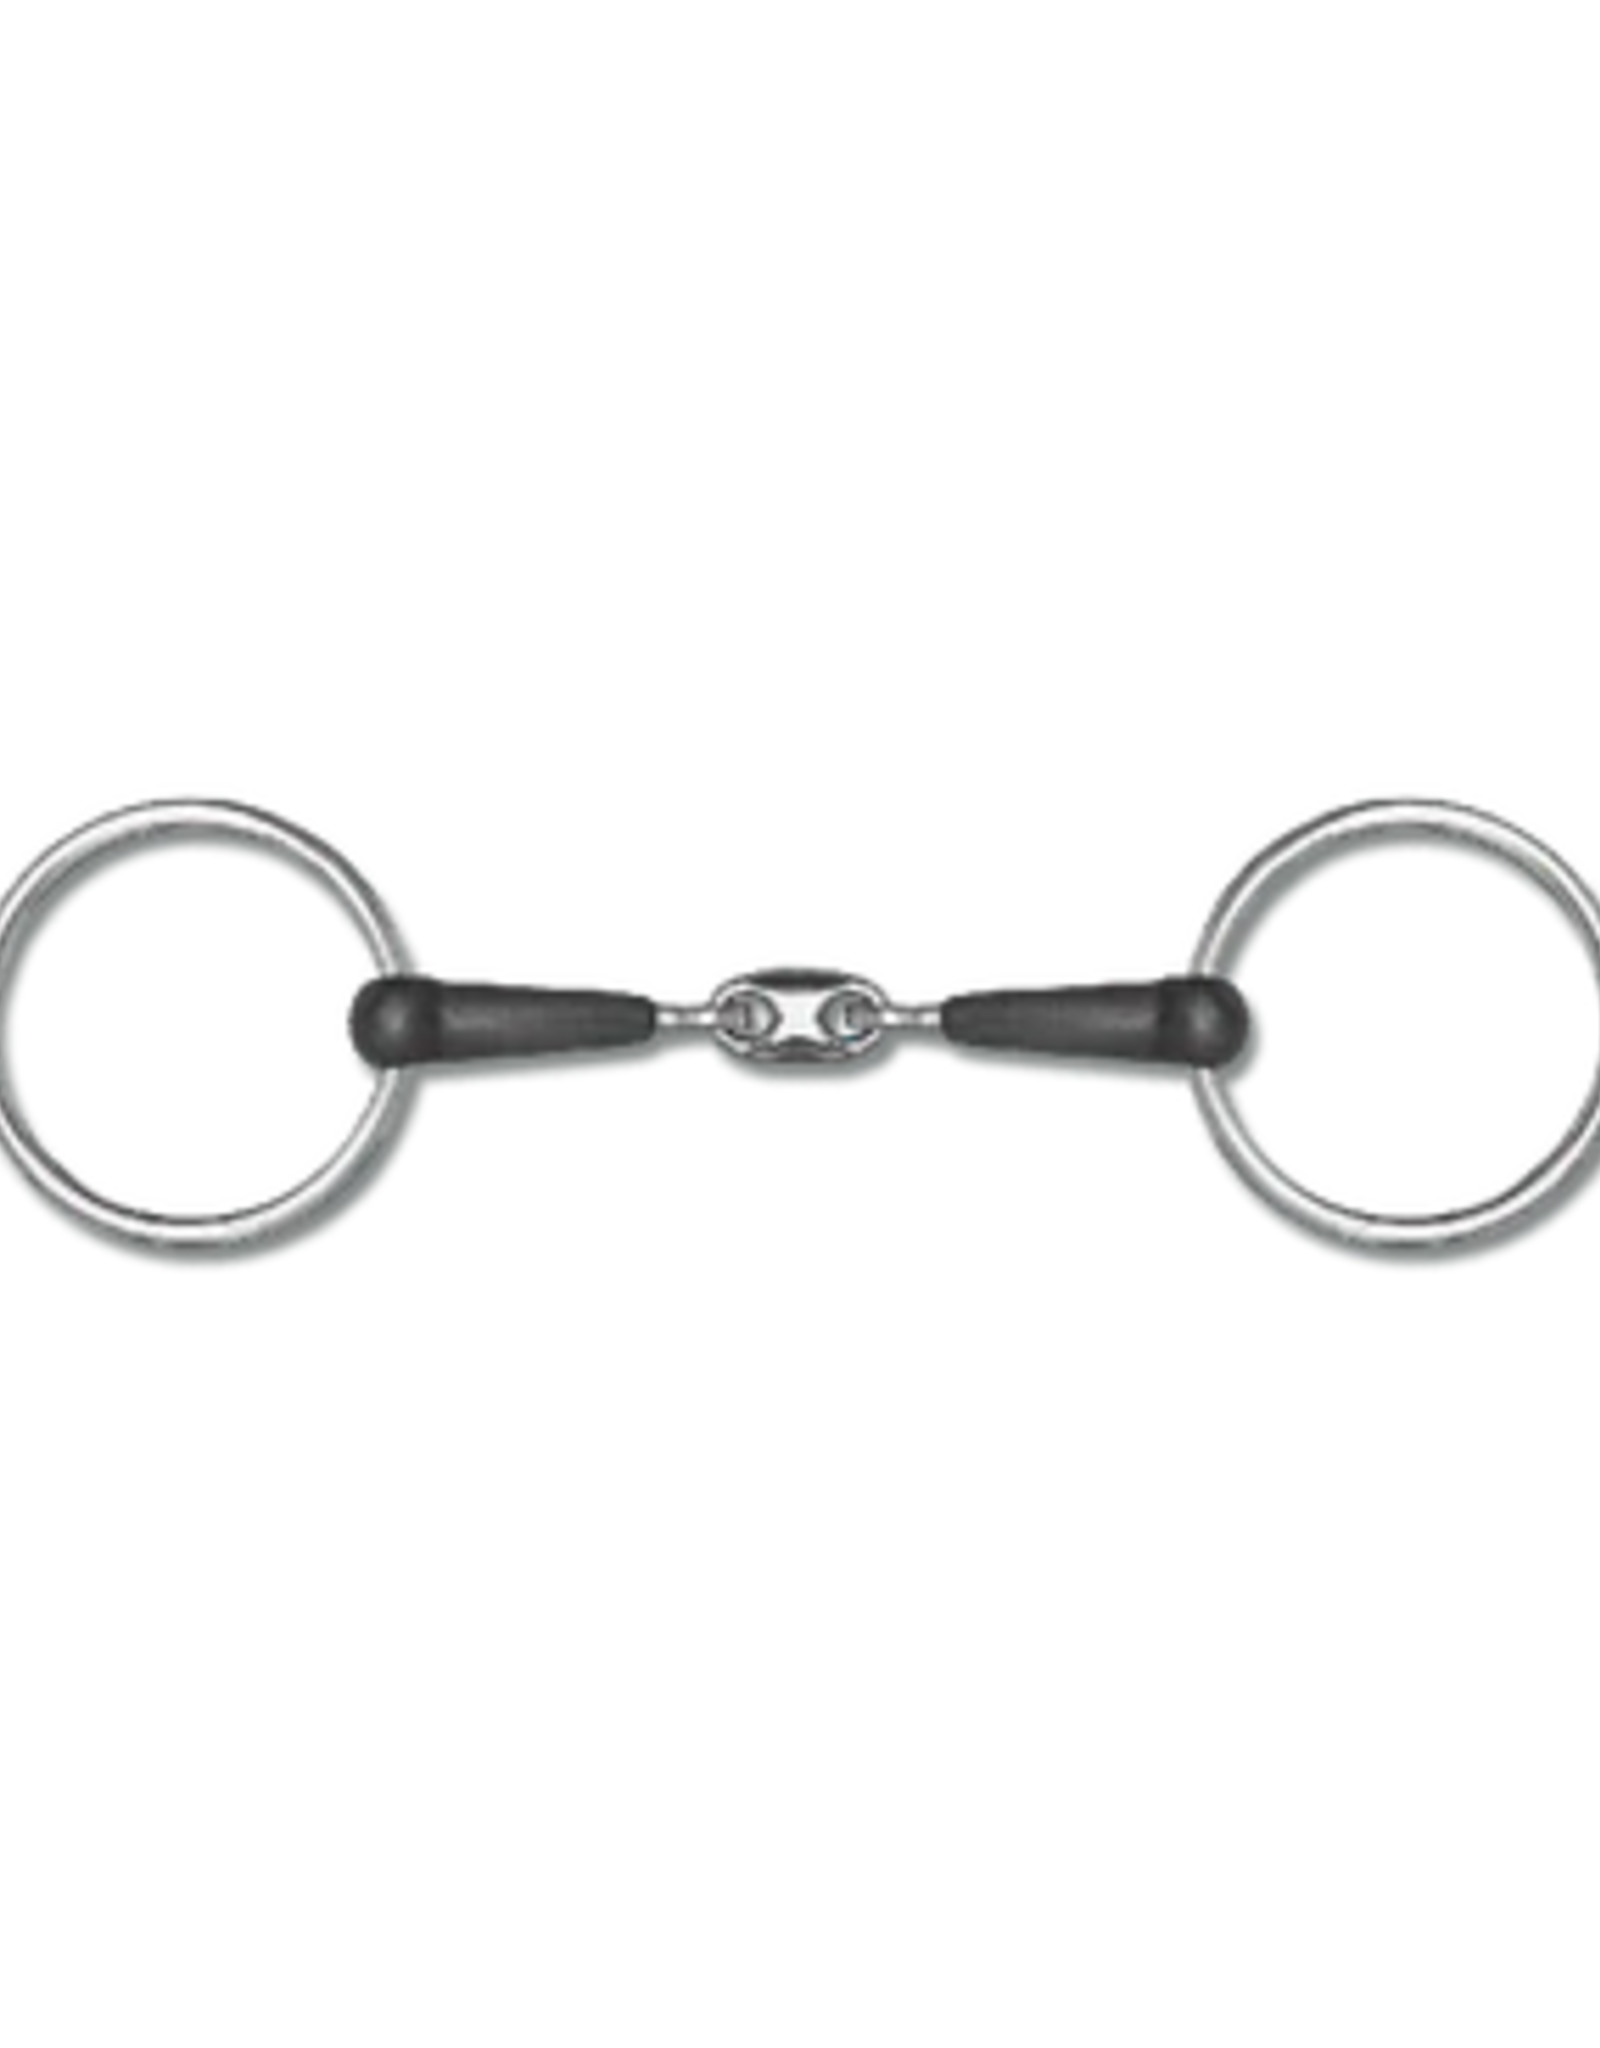 WALDHAUSEN LOOSE RING DOUBLE JOINTED RUBBER SNAFFLE